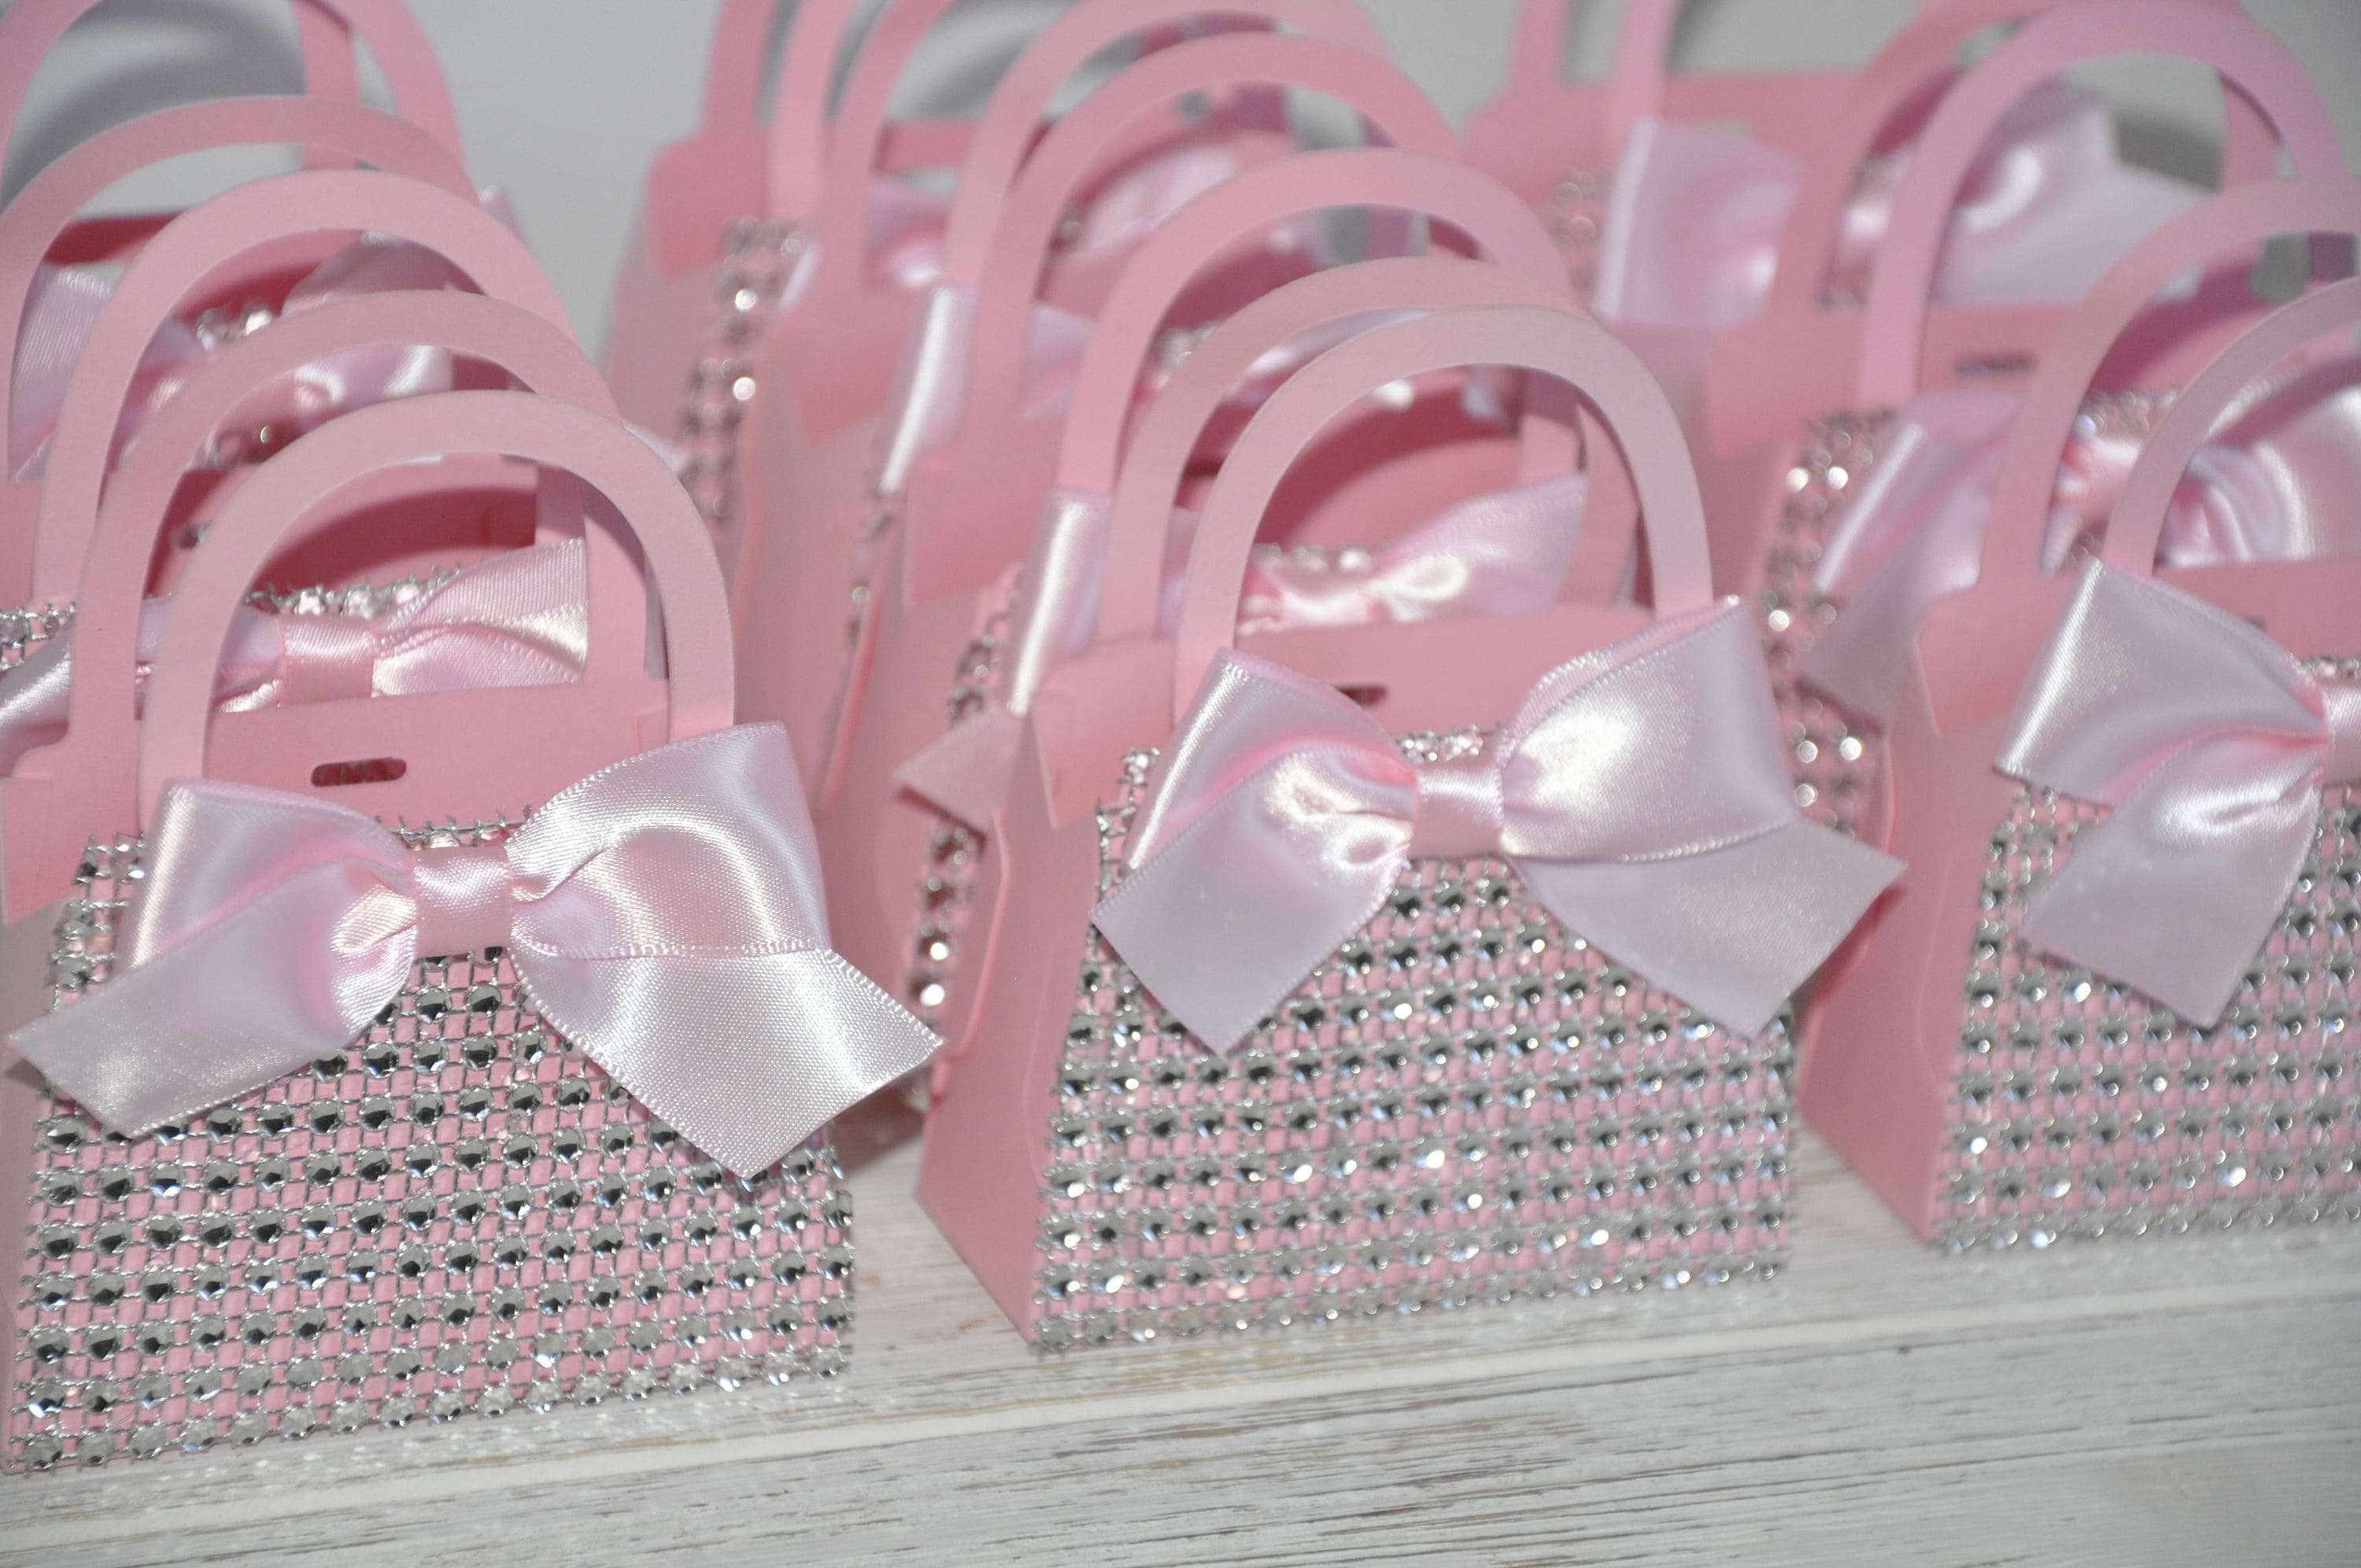  36 Pcs Thank You Candy Bags Pure Pink Paper Gift Boxes Mini  Paper gift bags with Pink Bow Ribbon Decor for Wedding, Bridal Baby Shower, party  favor (5.51 x 2.36 x